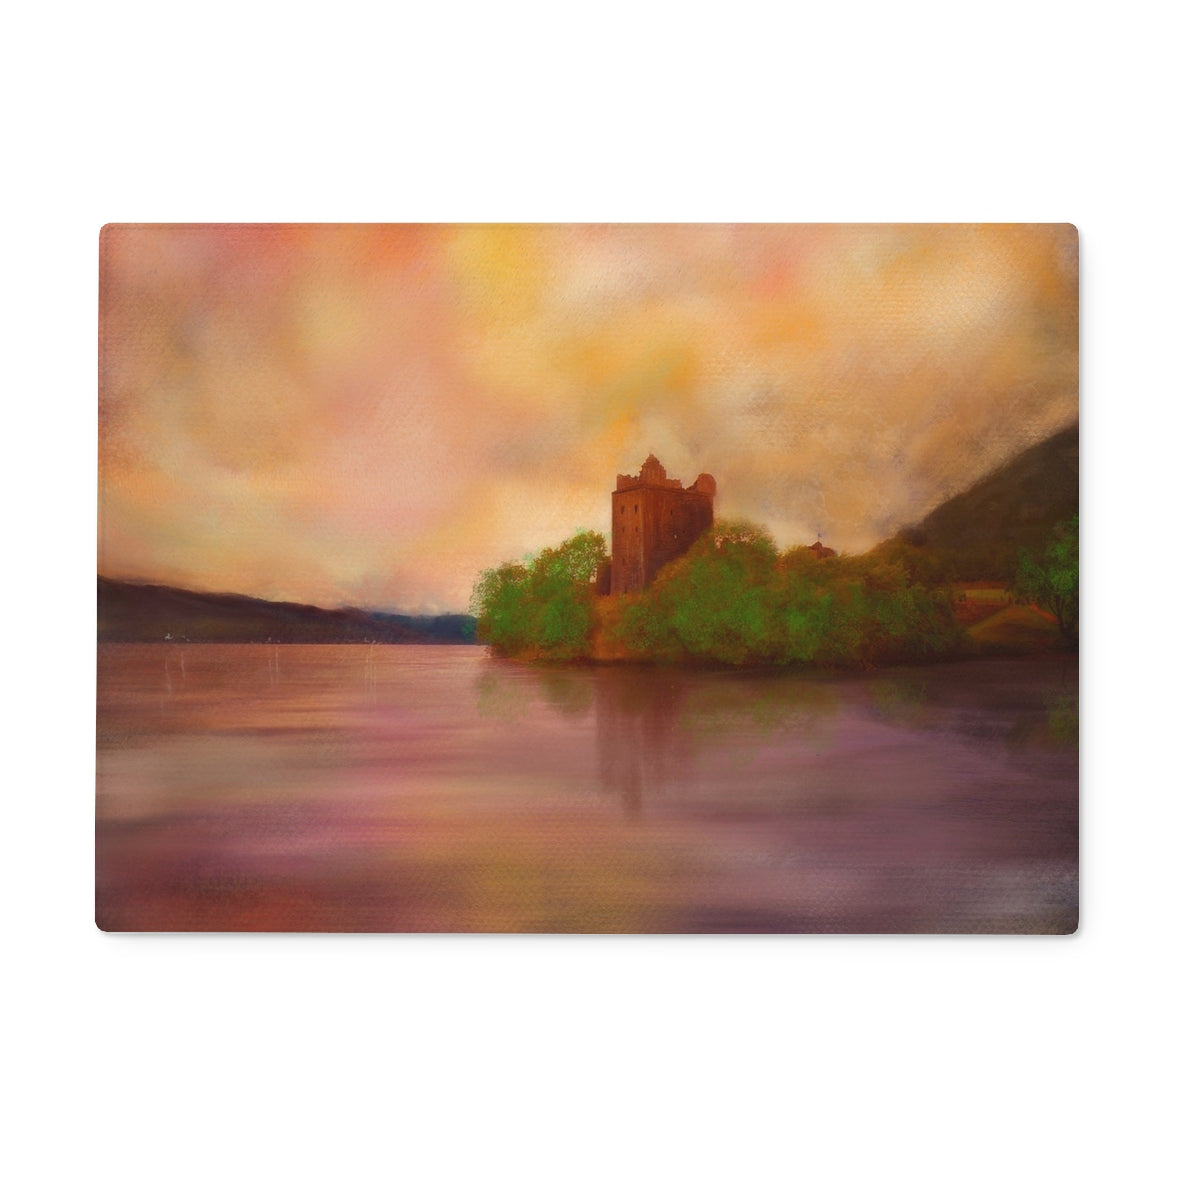 Urquhart Castle Art Gifts Glass Chopping Board-Glass Chopping Boards-Historic & Iconic Scotland Art Gallery-15"x11" Rectangular-Paintings, Prints, Homeware, Art Gifts From Scotland By Scottish Artist Kevin Hunter